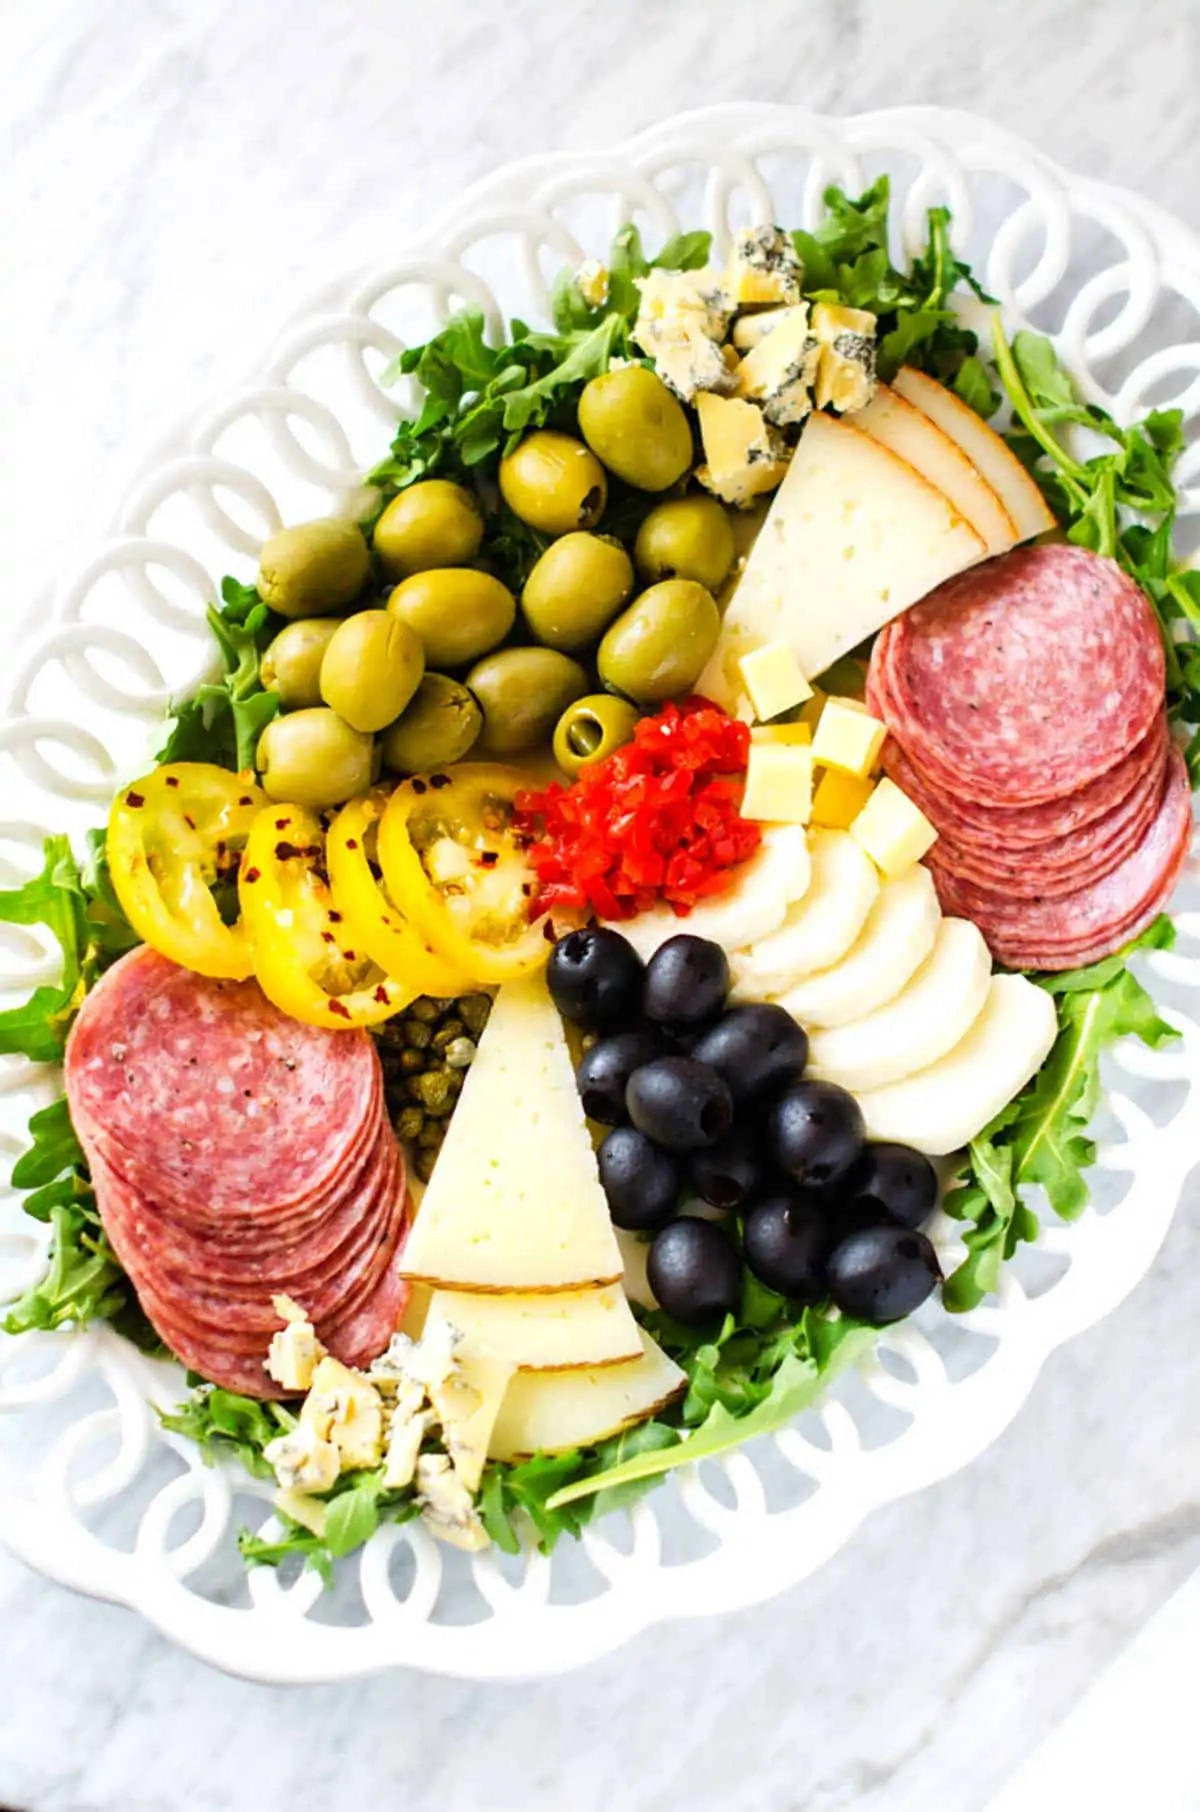 Overhead photo of an antipasto platter against a white marble background.